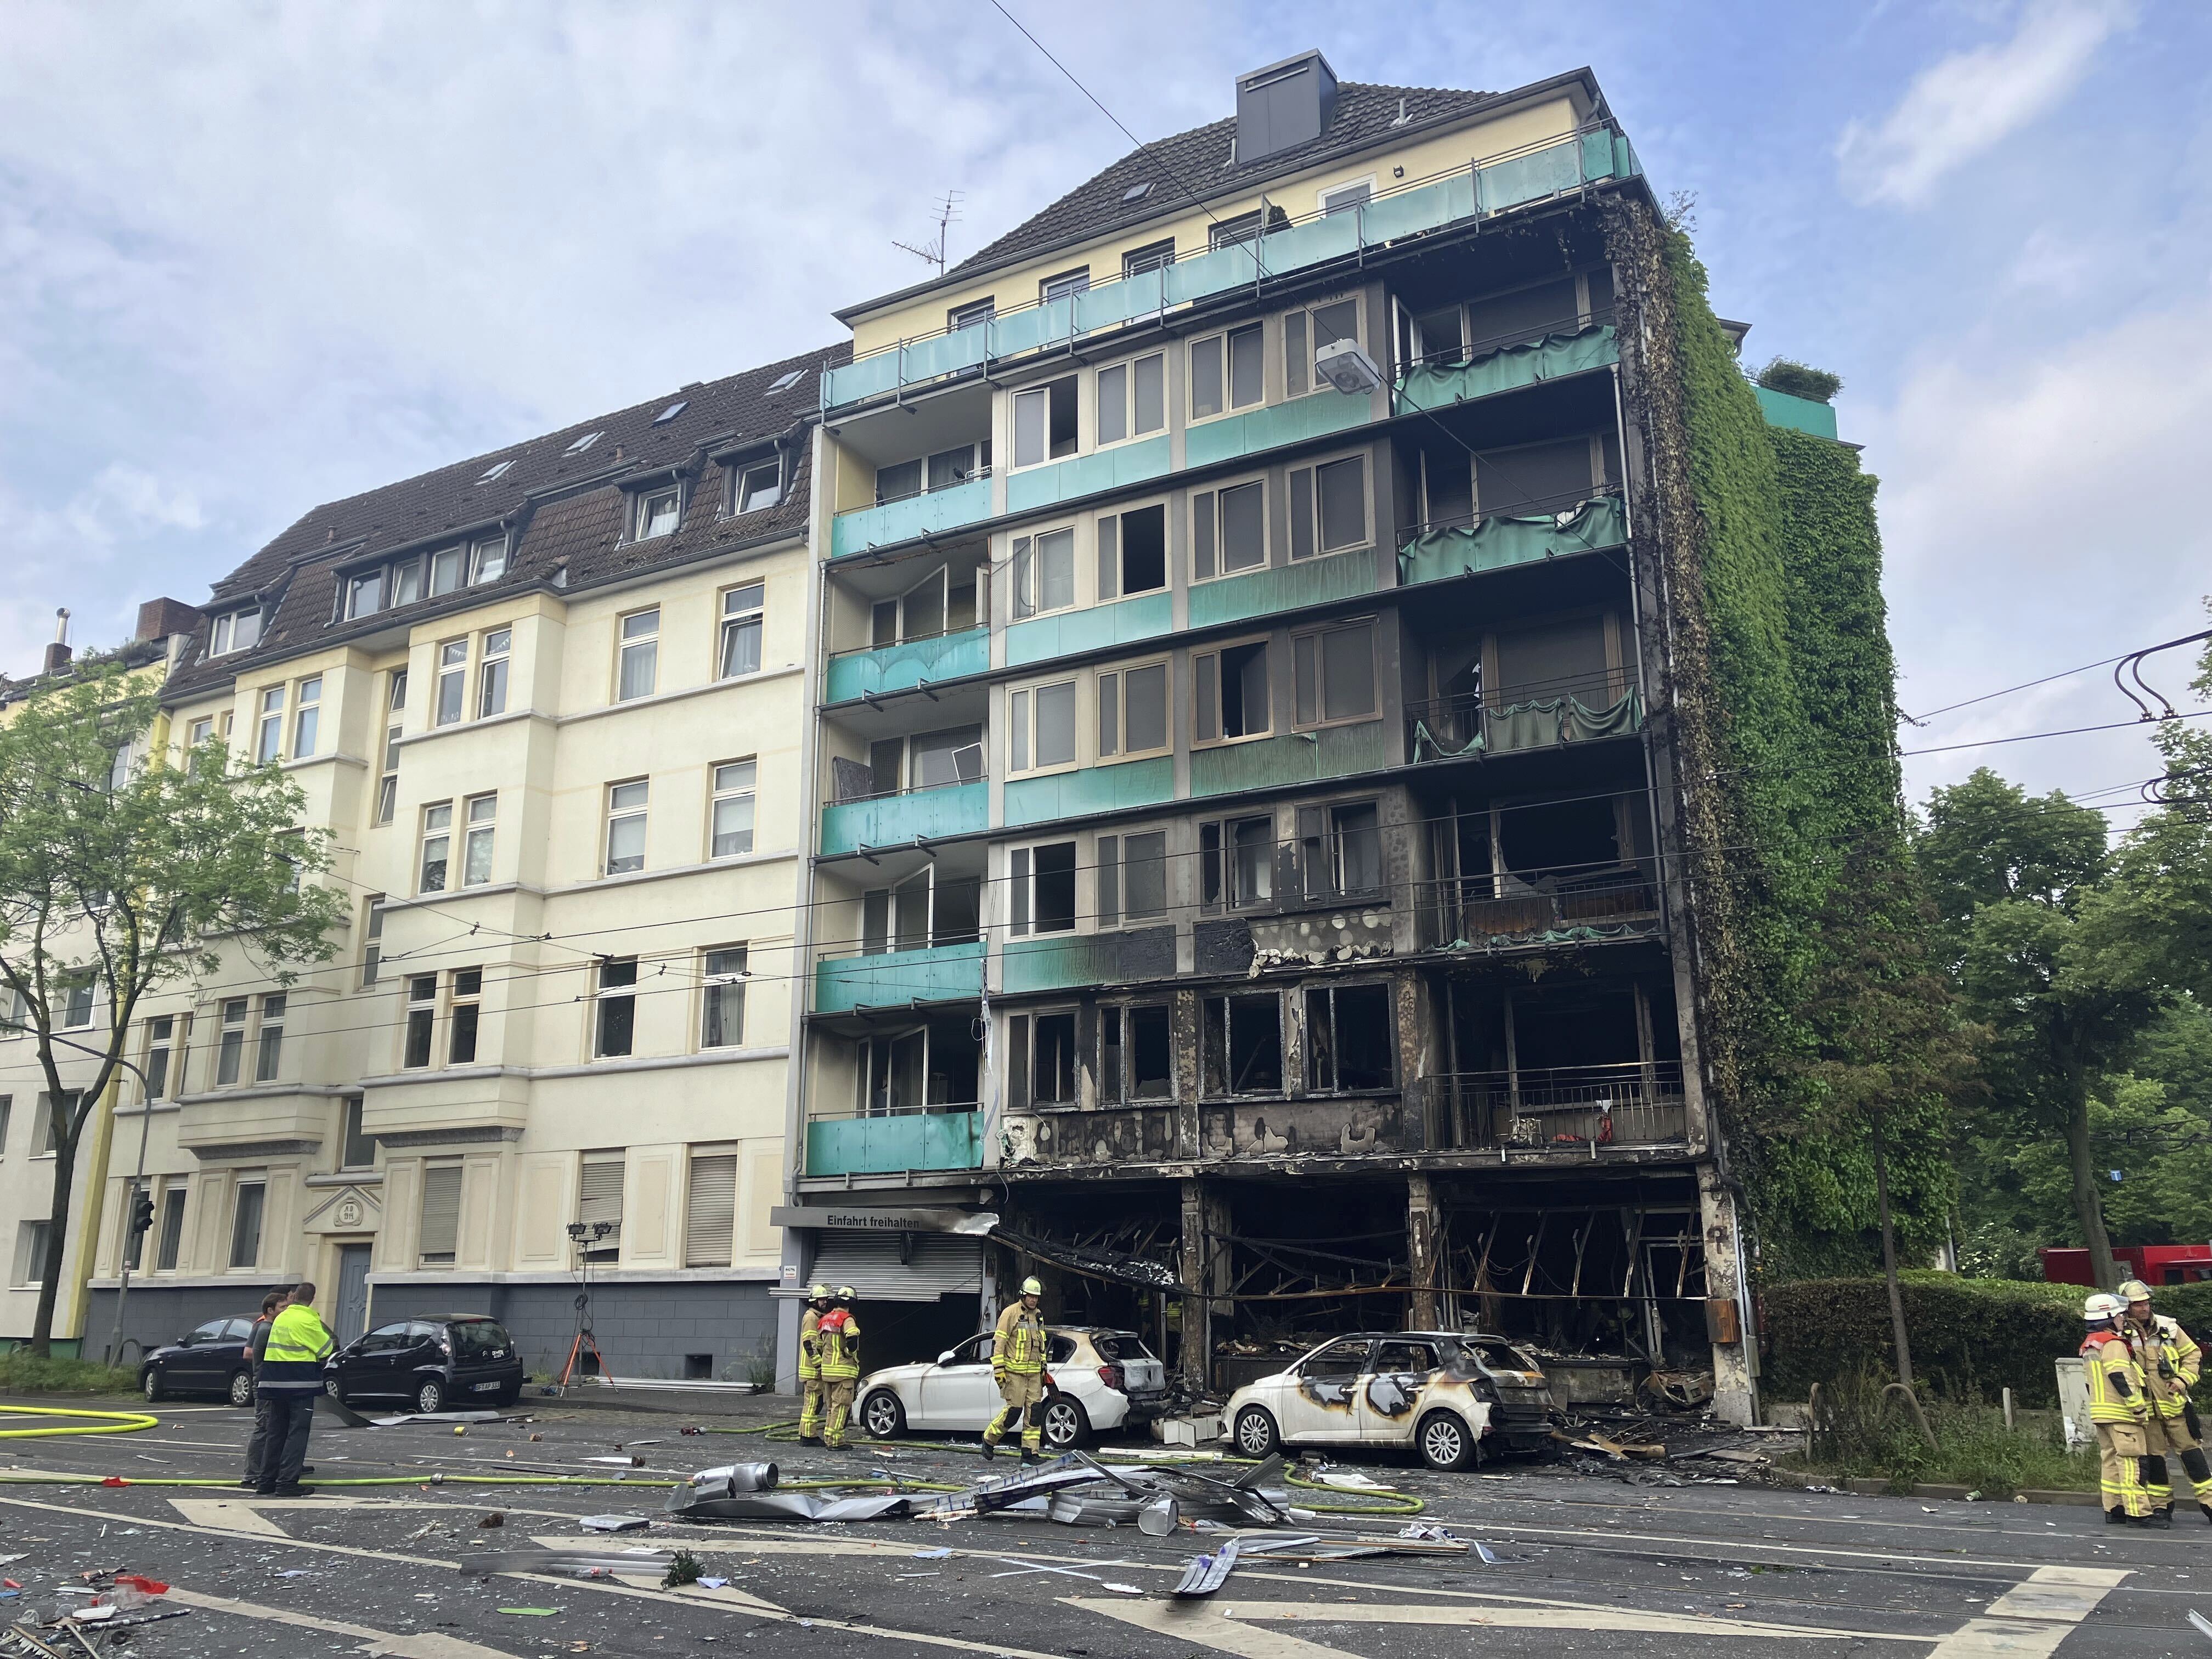 Fire at a residential building in Germany leaves 3 people dead and 2 with grave injuries 